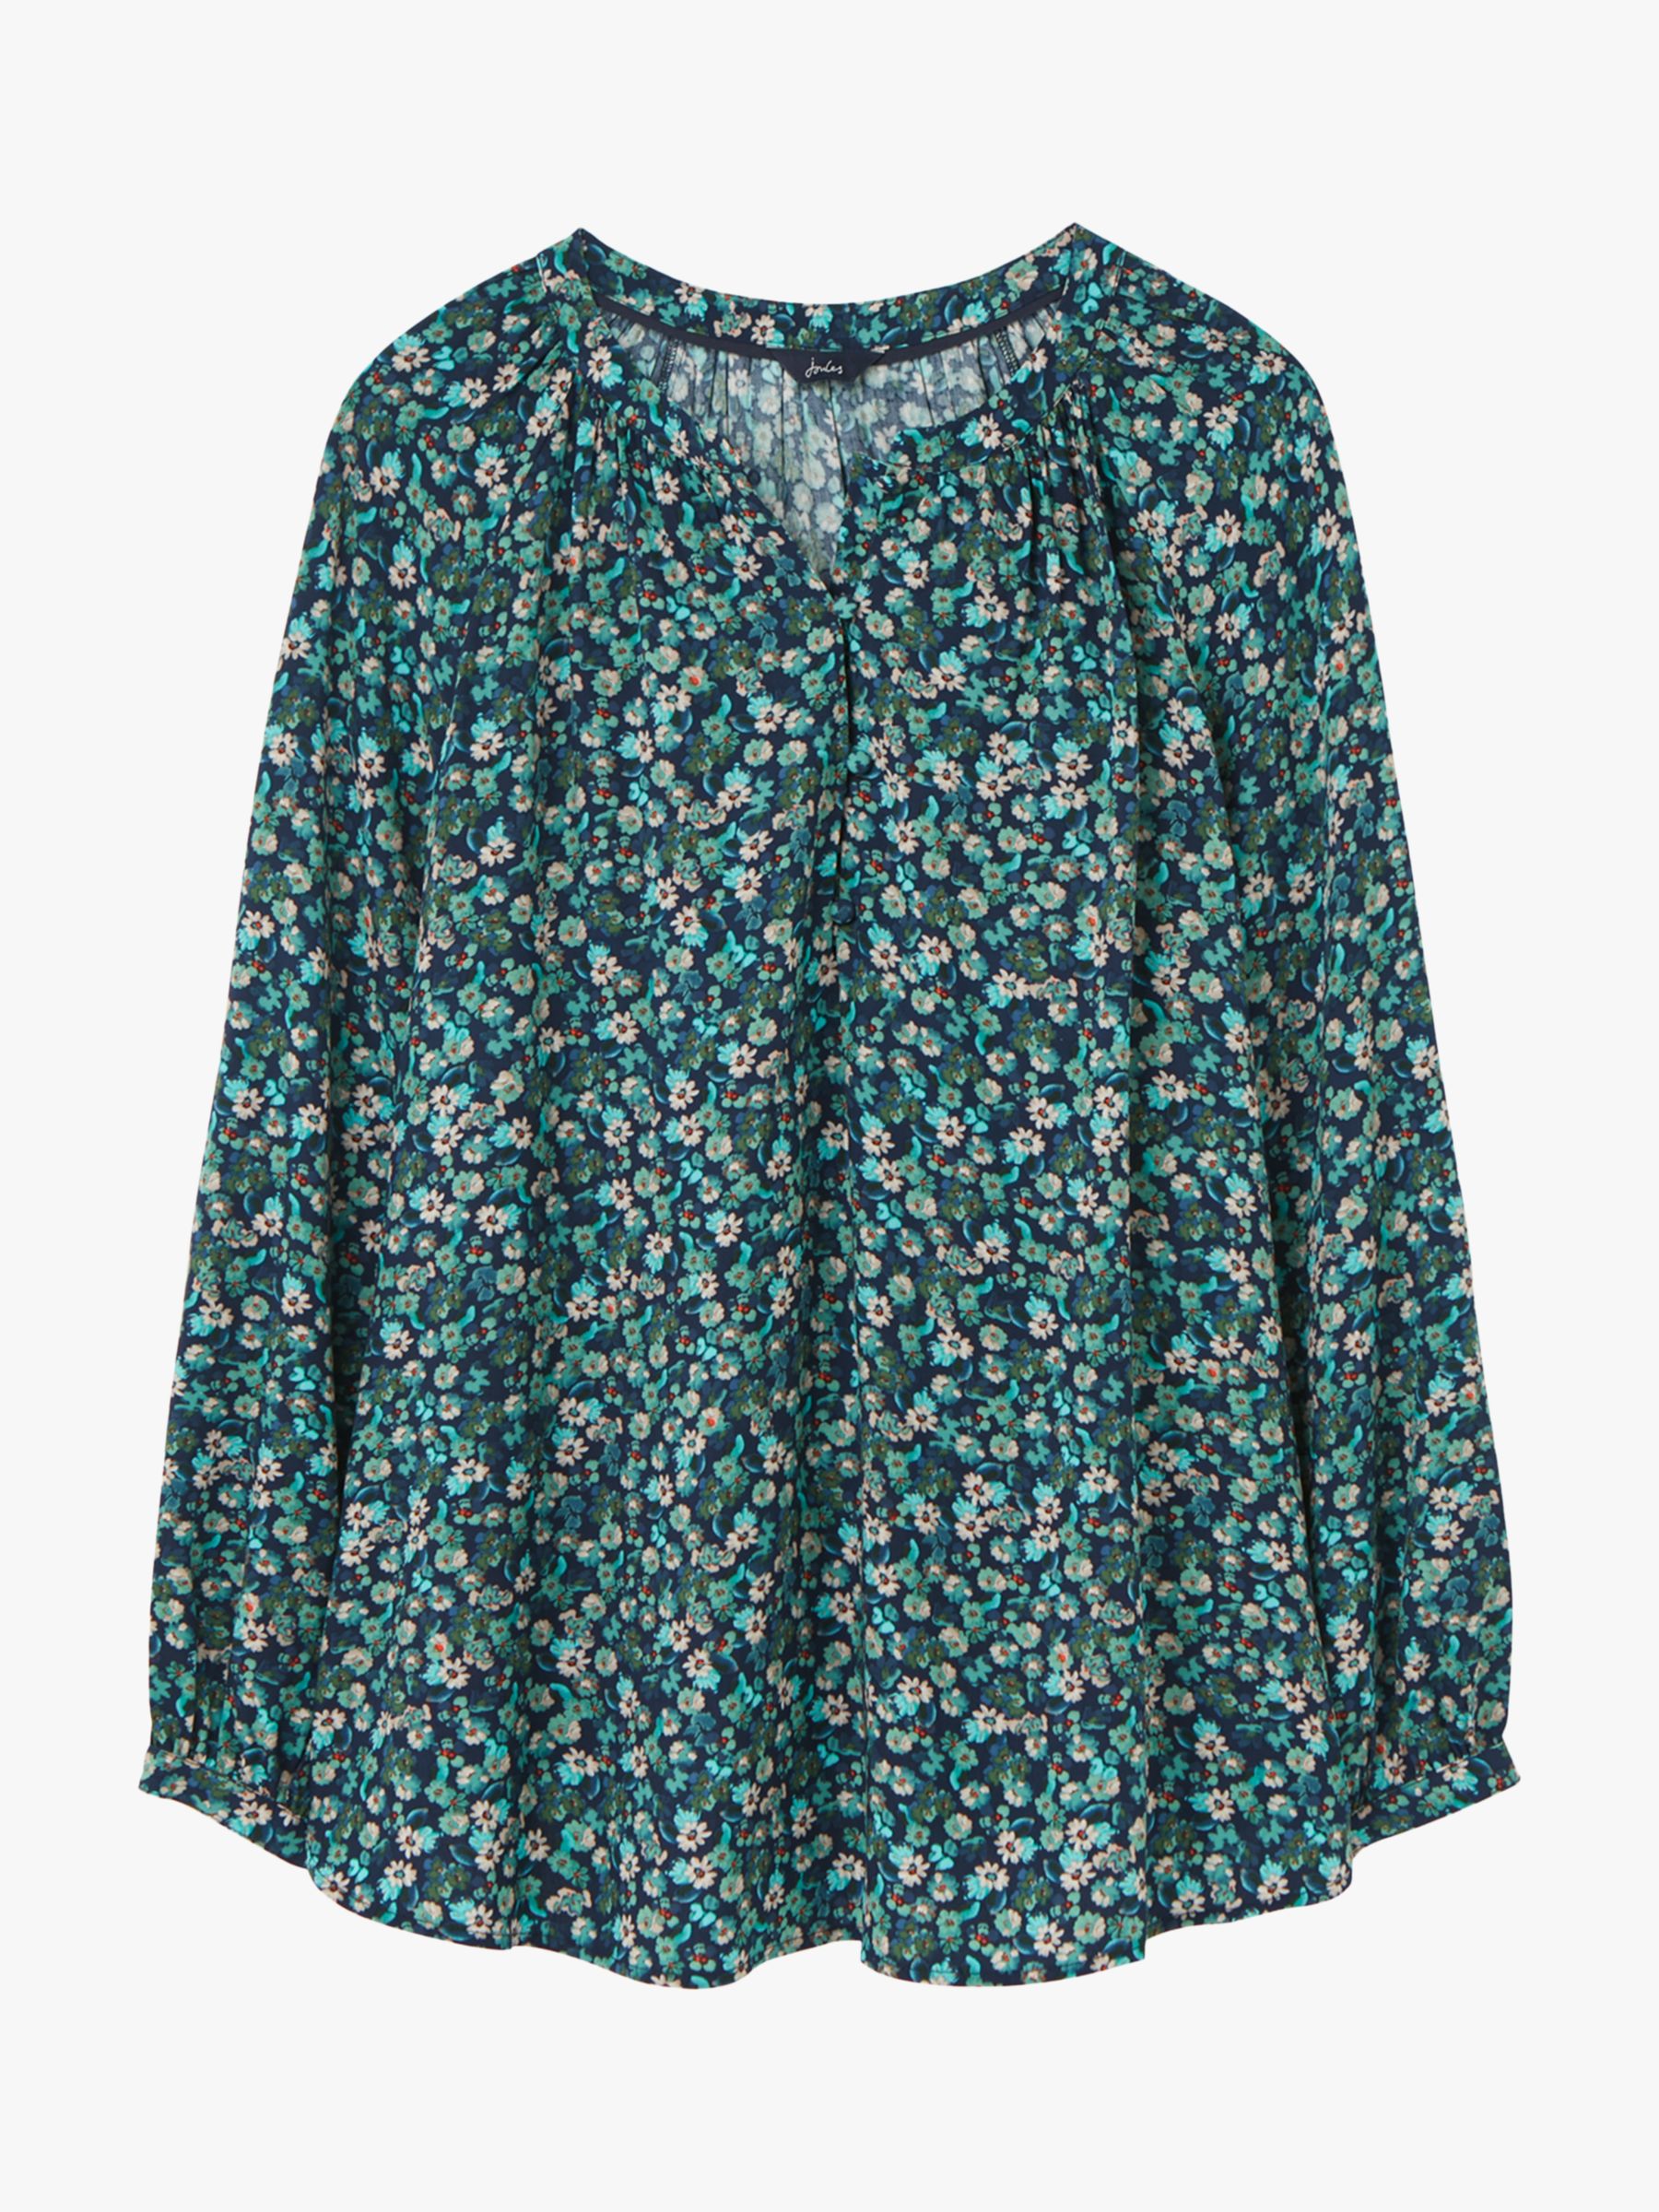 Joules Odette Floral Top, Navy Ditsy at John Lewis & Partners